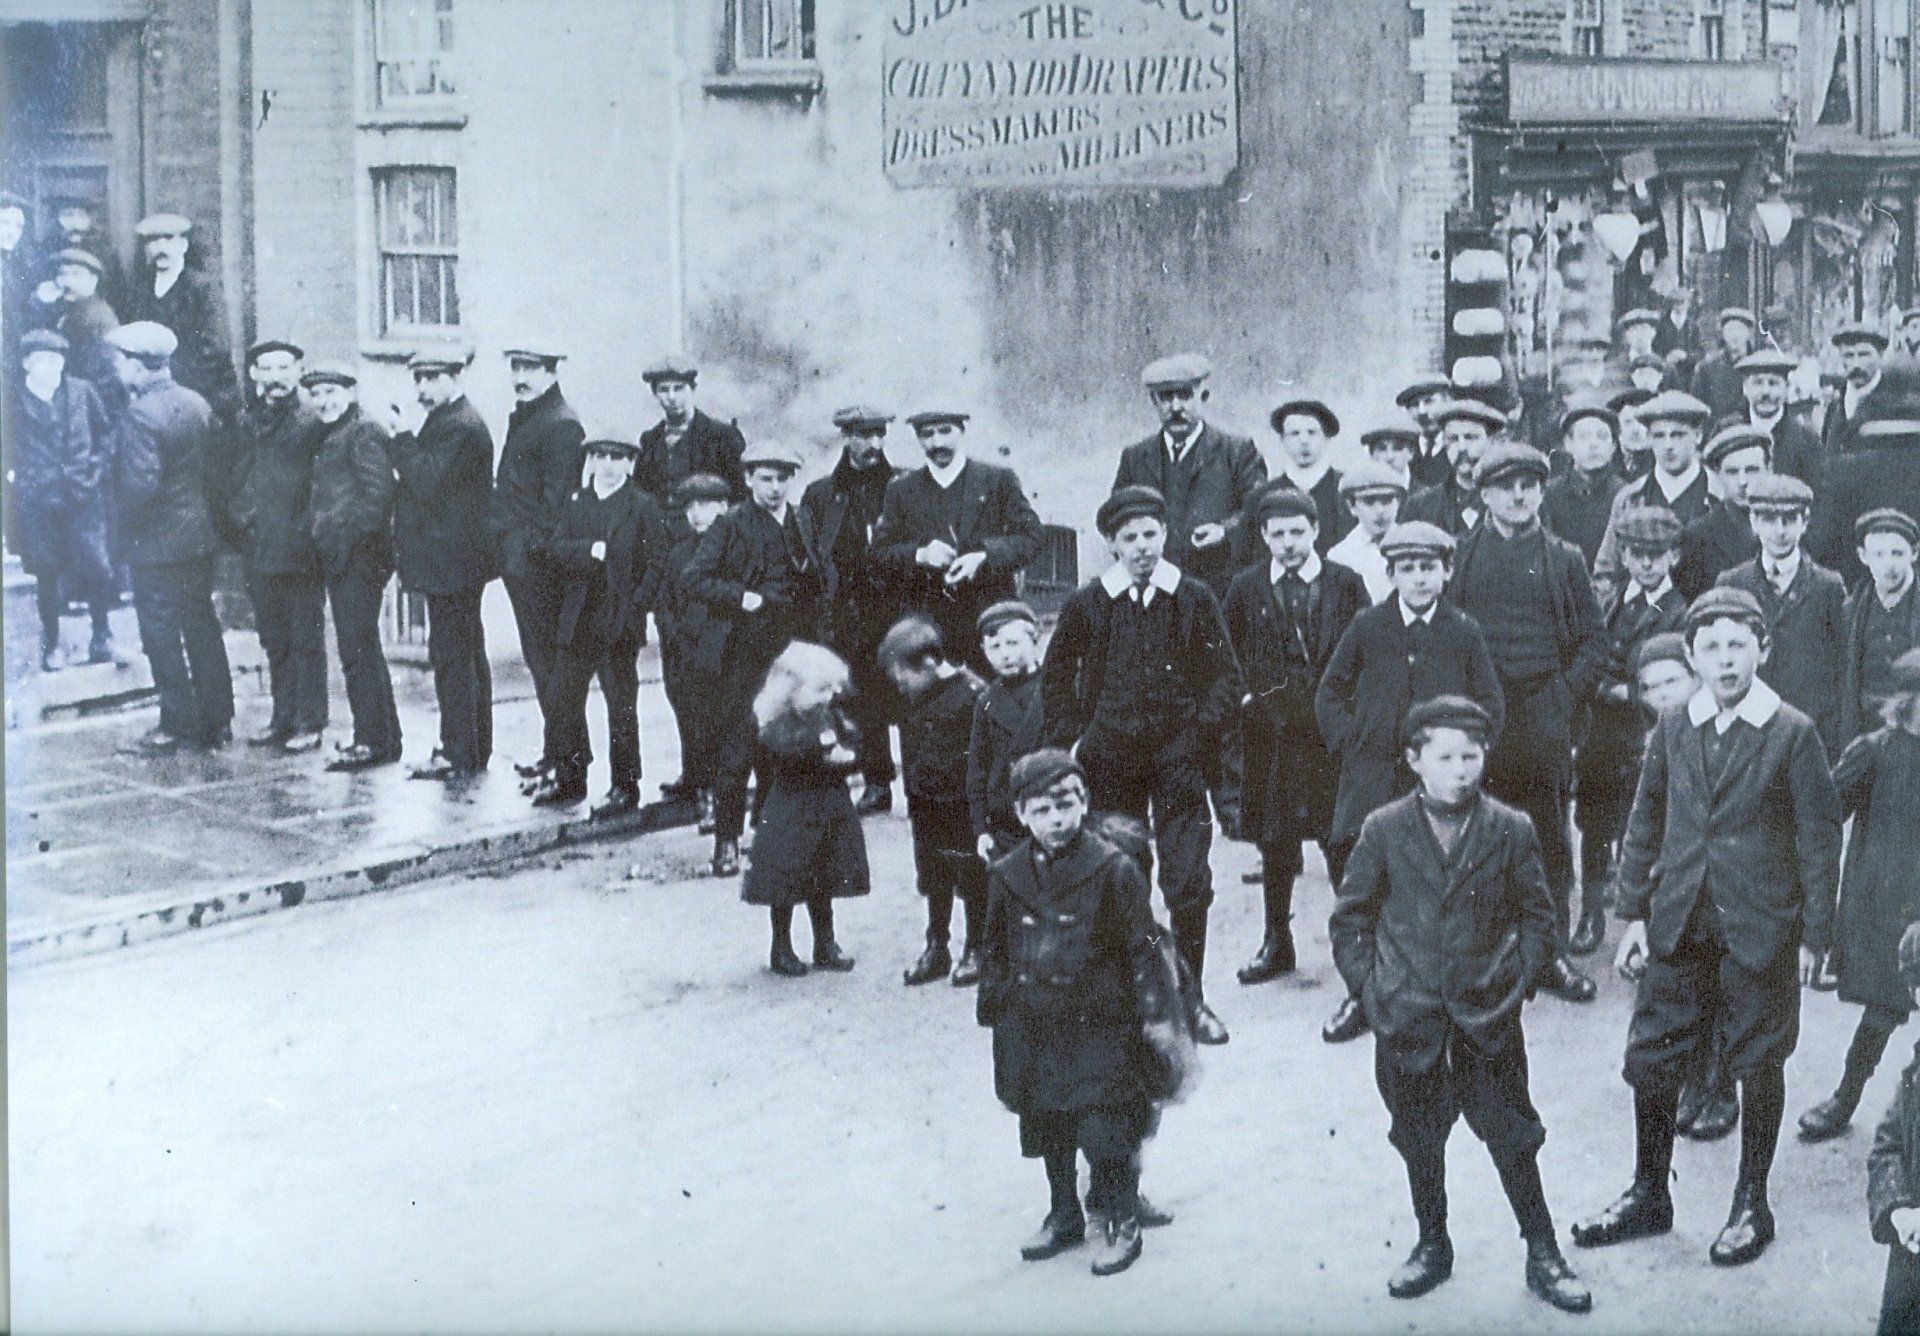 Striking miners attend a meeting at the Workmens' Hall, Howell Street c.1910 during the Cambrian Combine Dispute